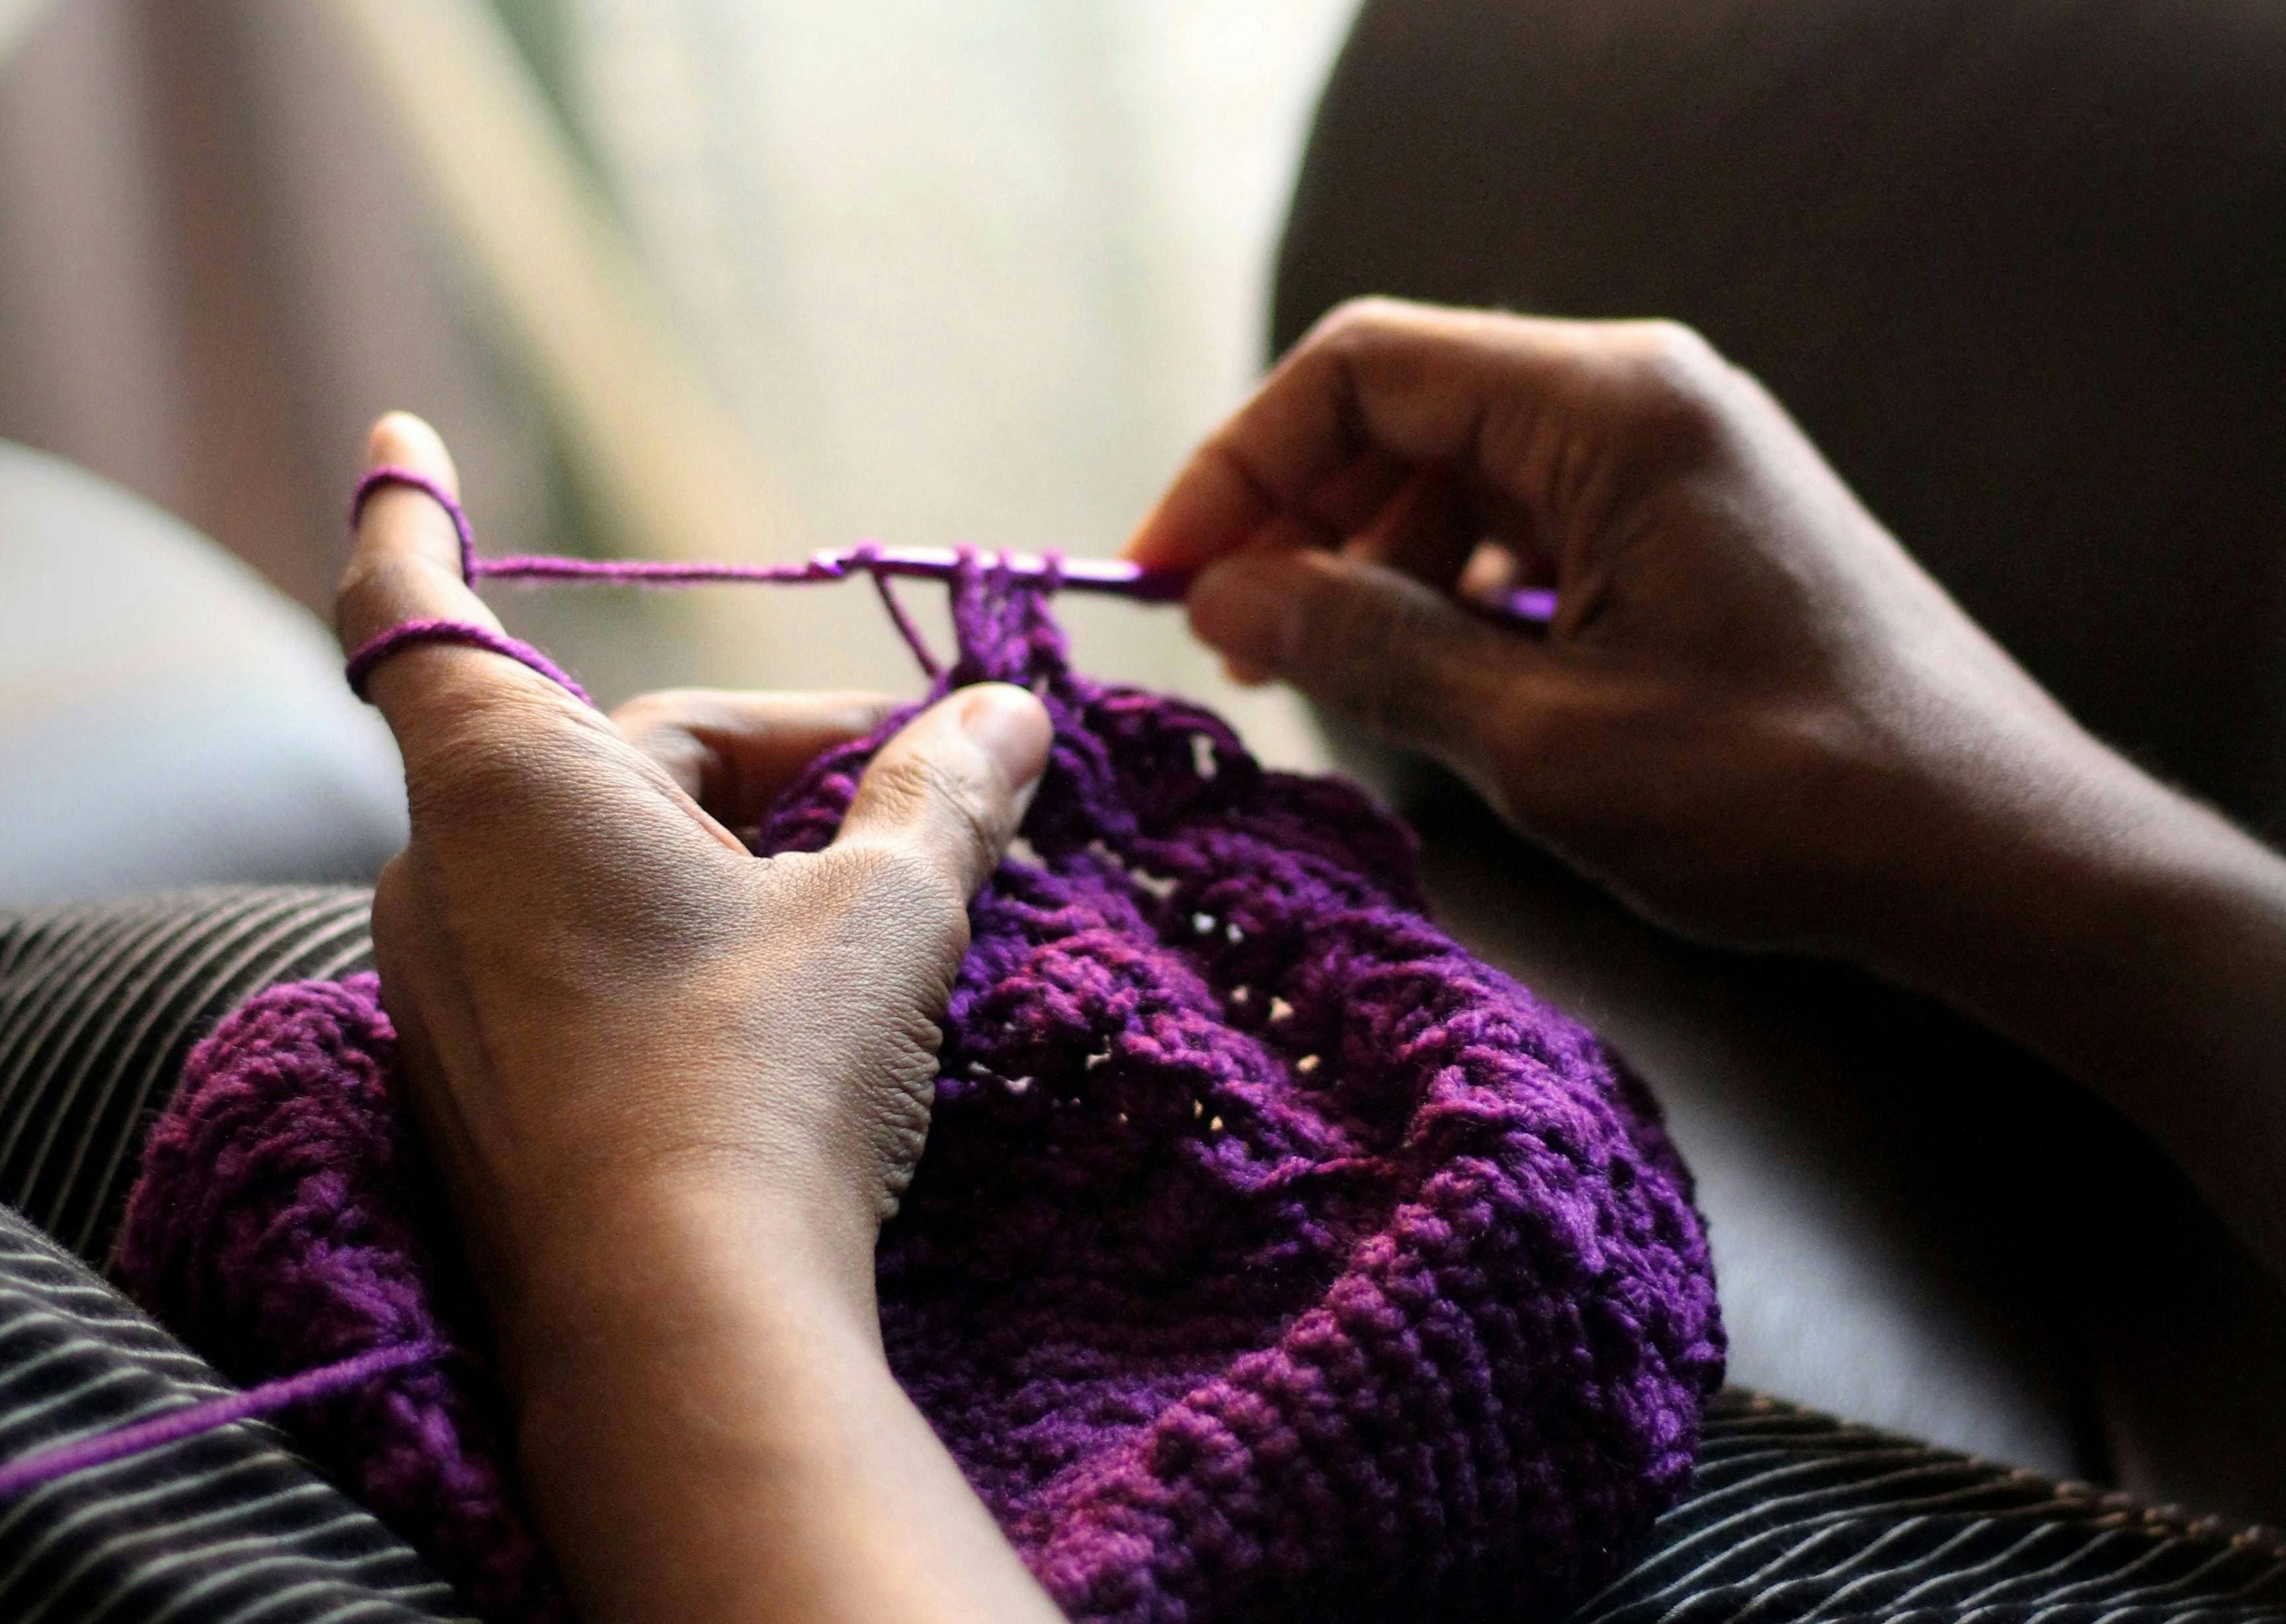 Crafting Joy: Crochet is more than just a hobby